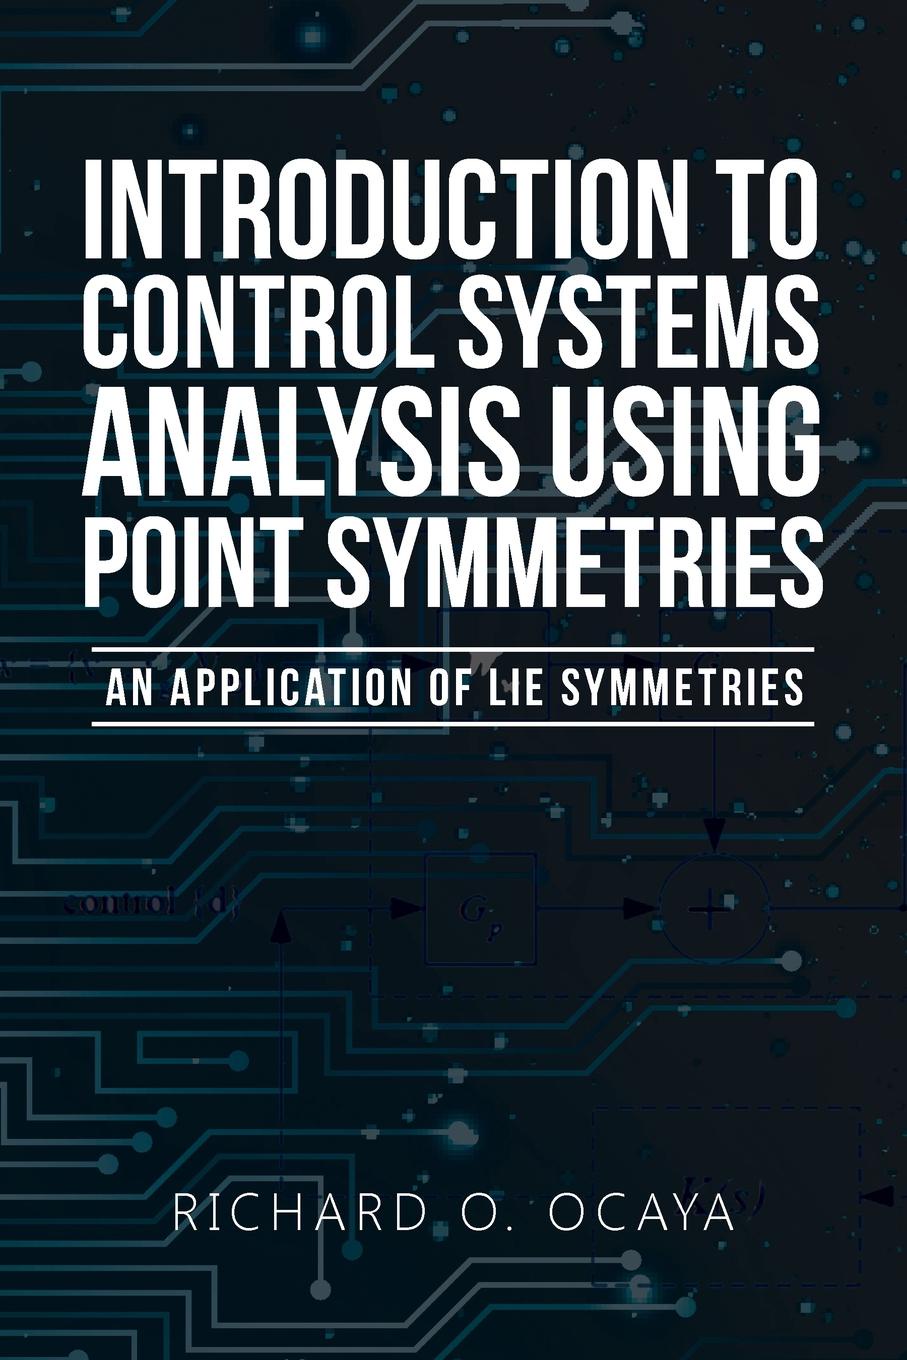 Introduction to Control Systems Analysis Using Point Symmetries. An Application of Lie Symmetries